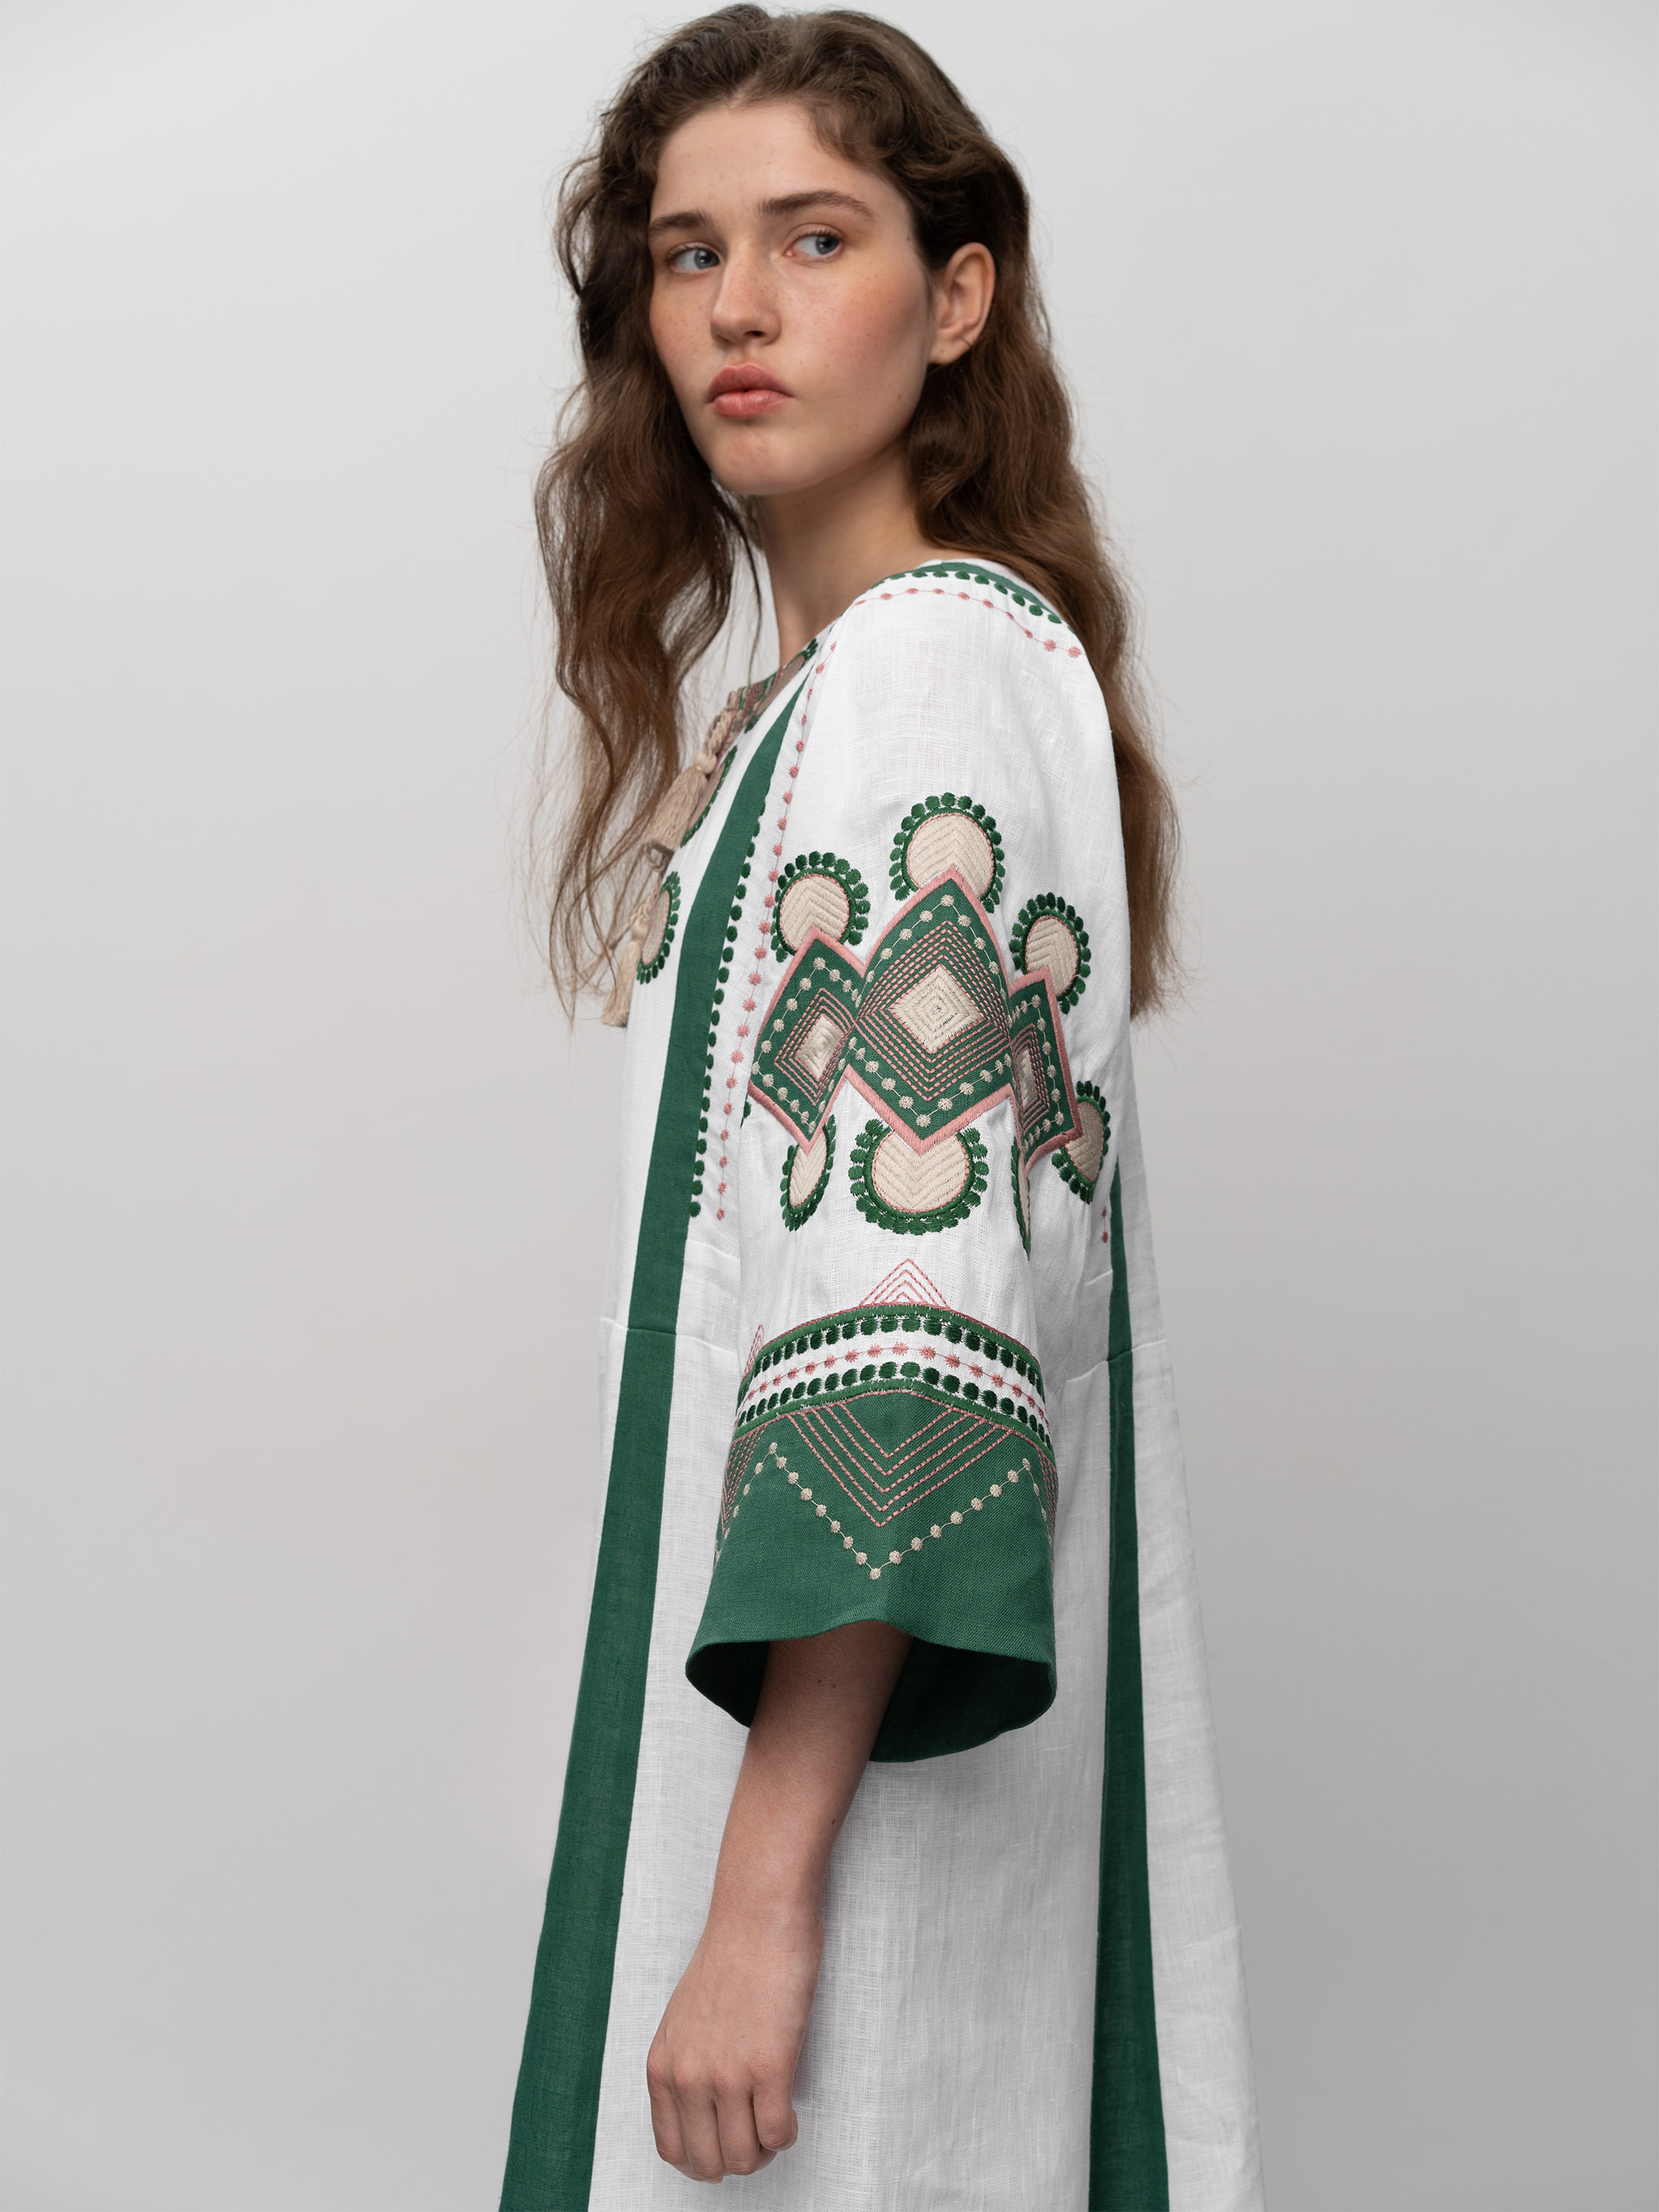 Green dress with black applique and embroidery VILHA buy in Kyiv